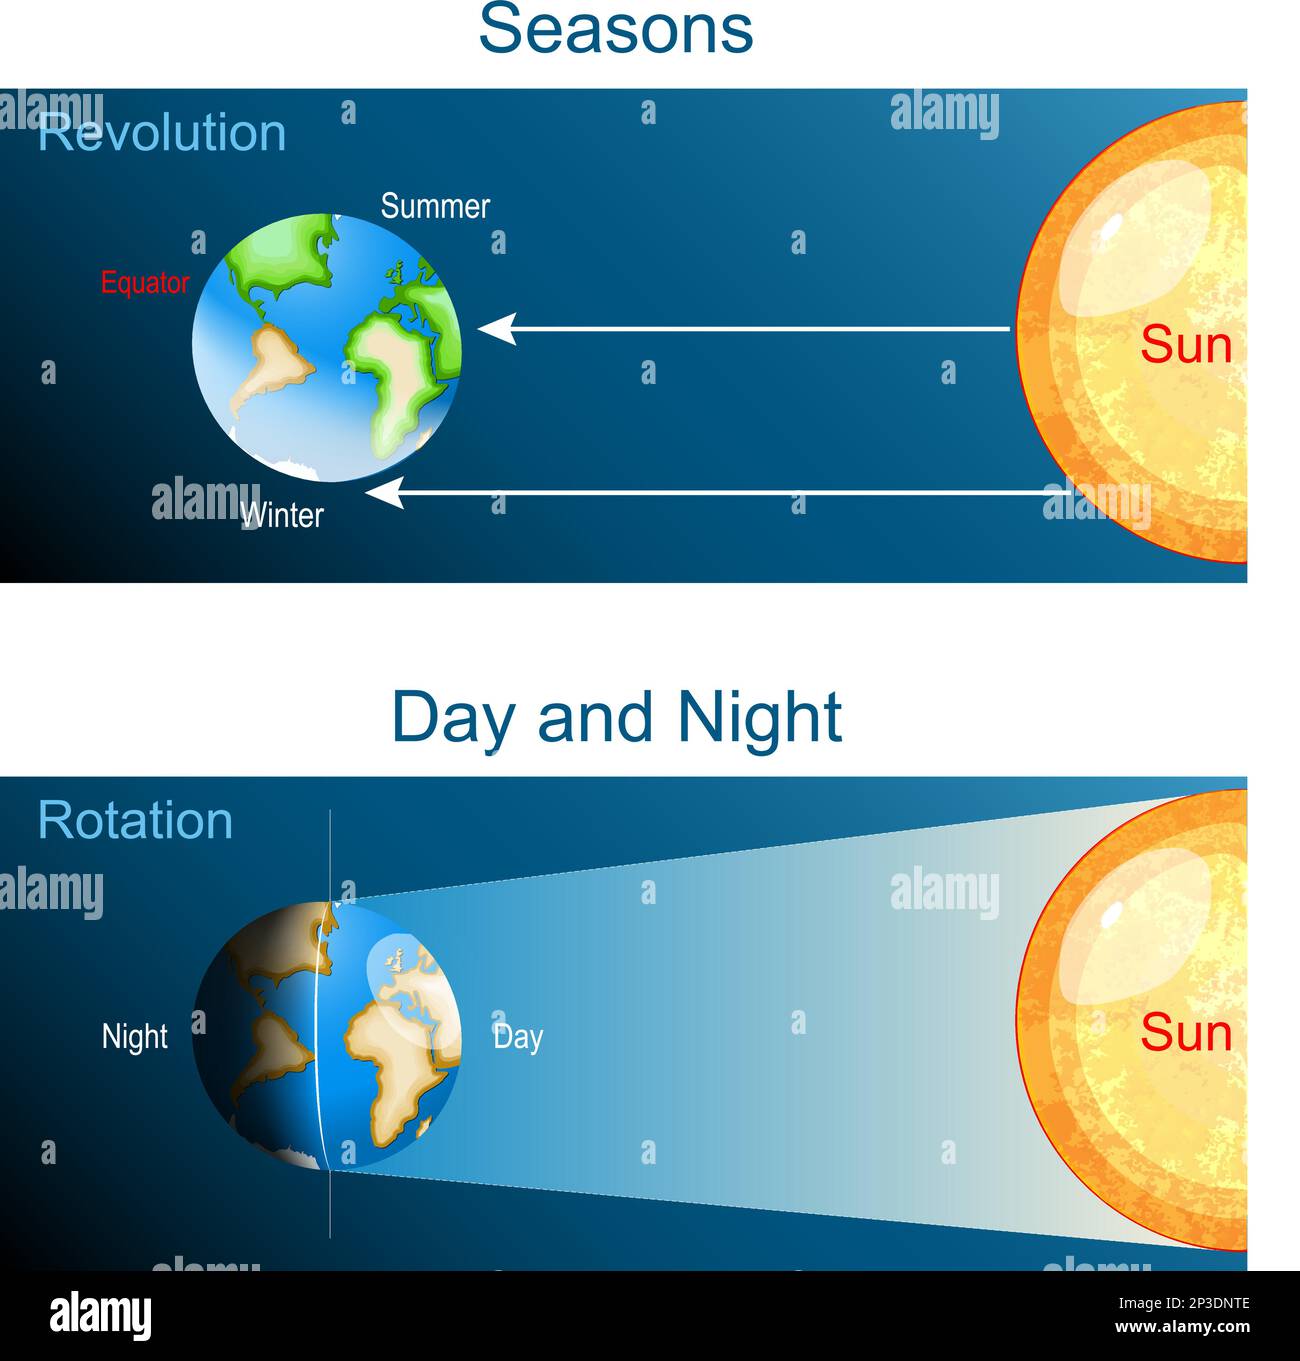 Earth rotation and Revolution. Vector poster about day, night and seasons on Earth planet. Stock Vector